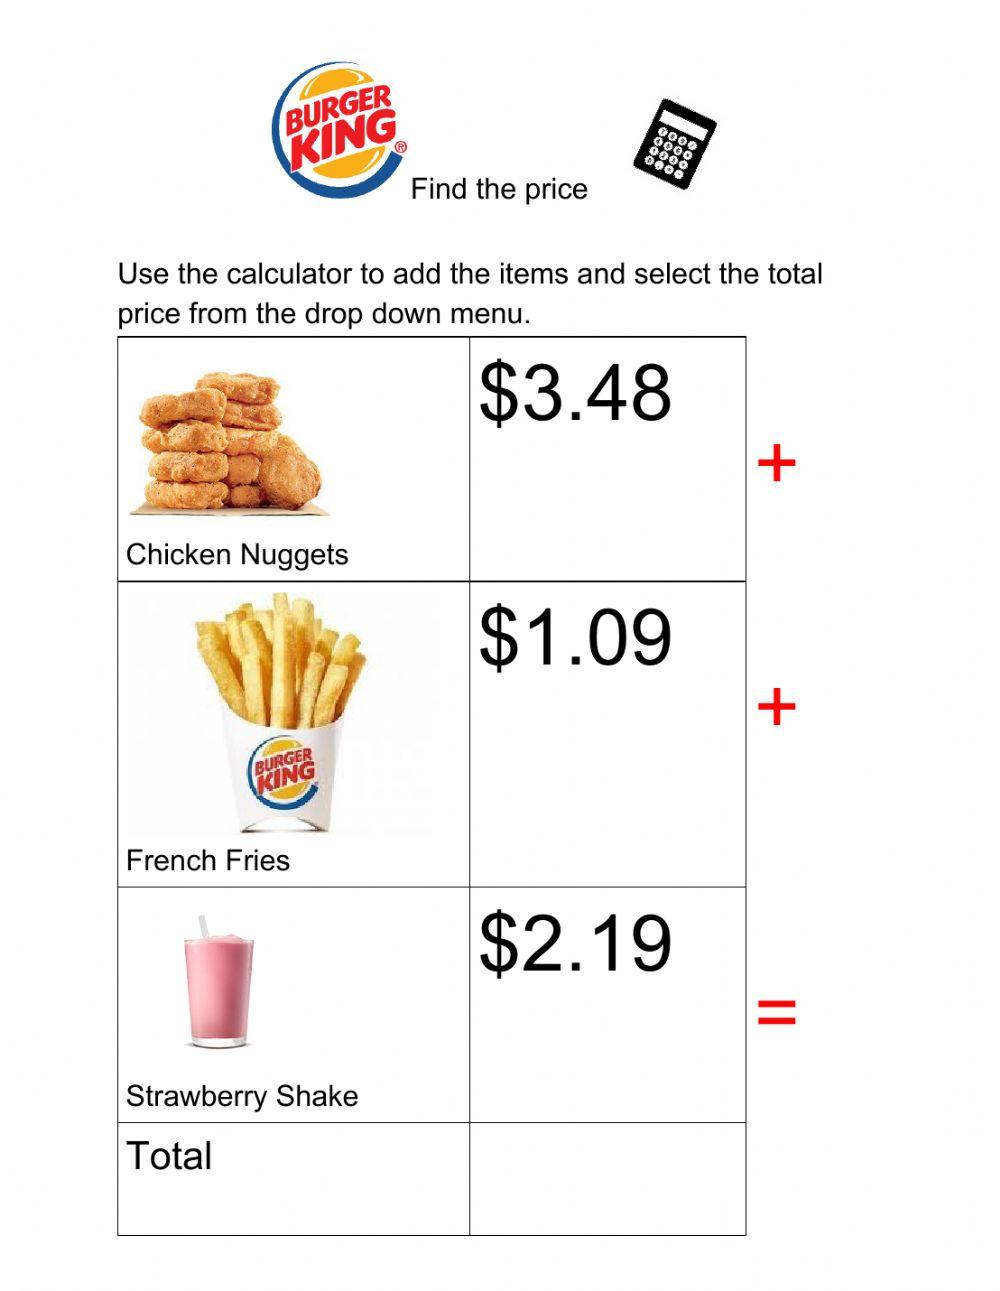 Find the Price Burger King